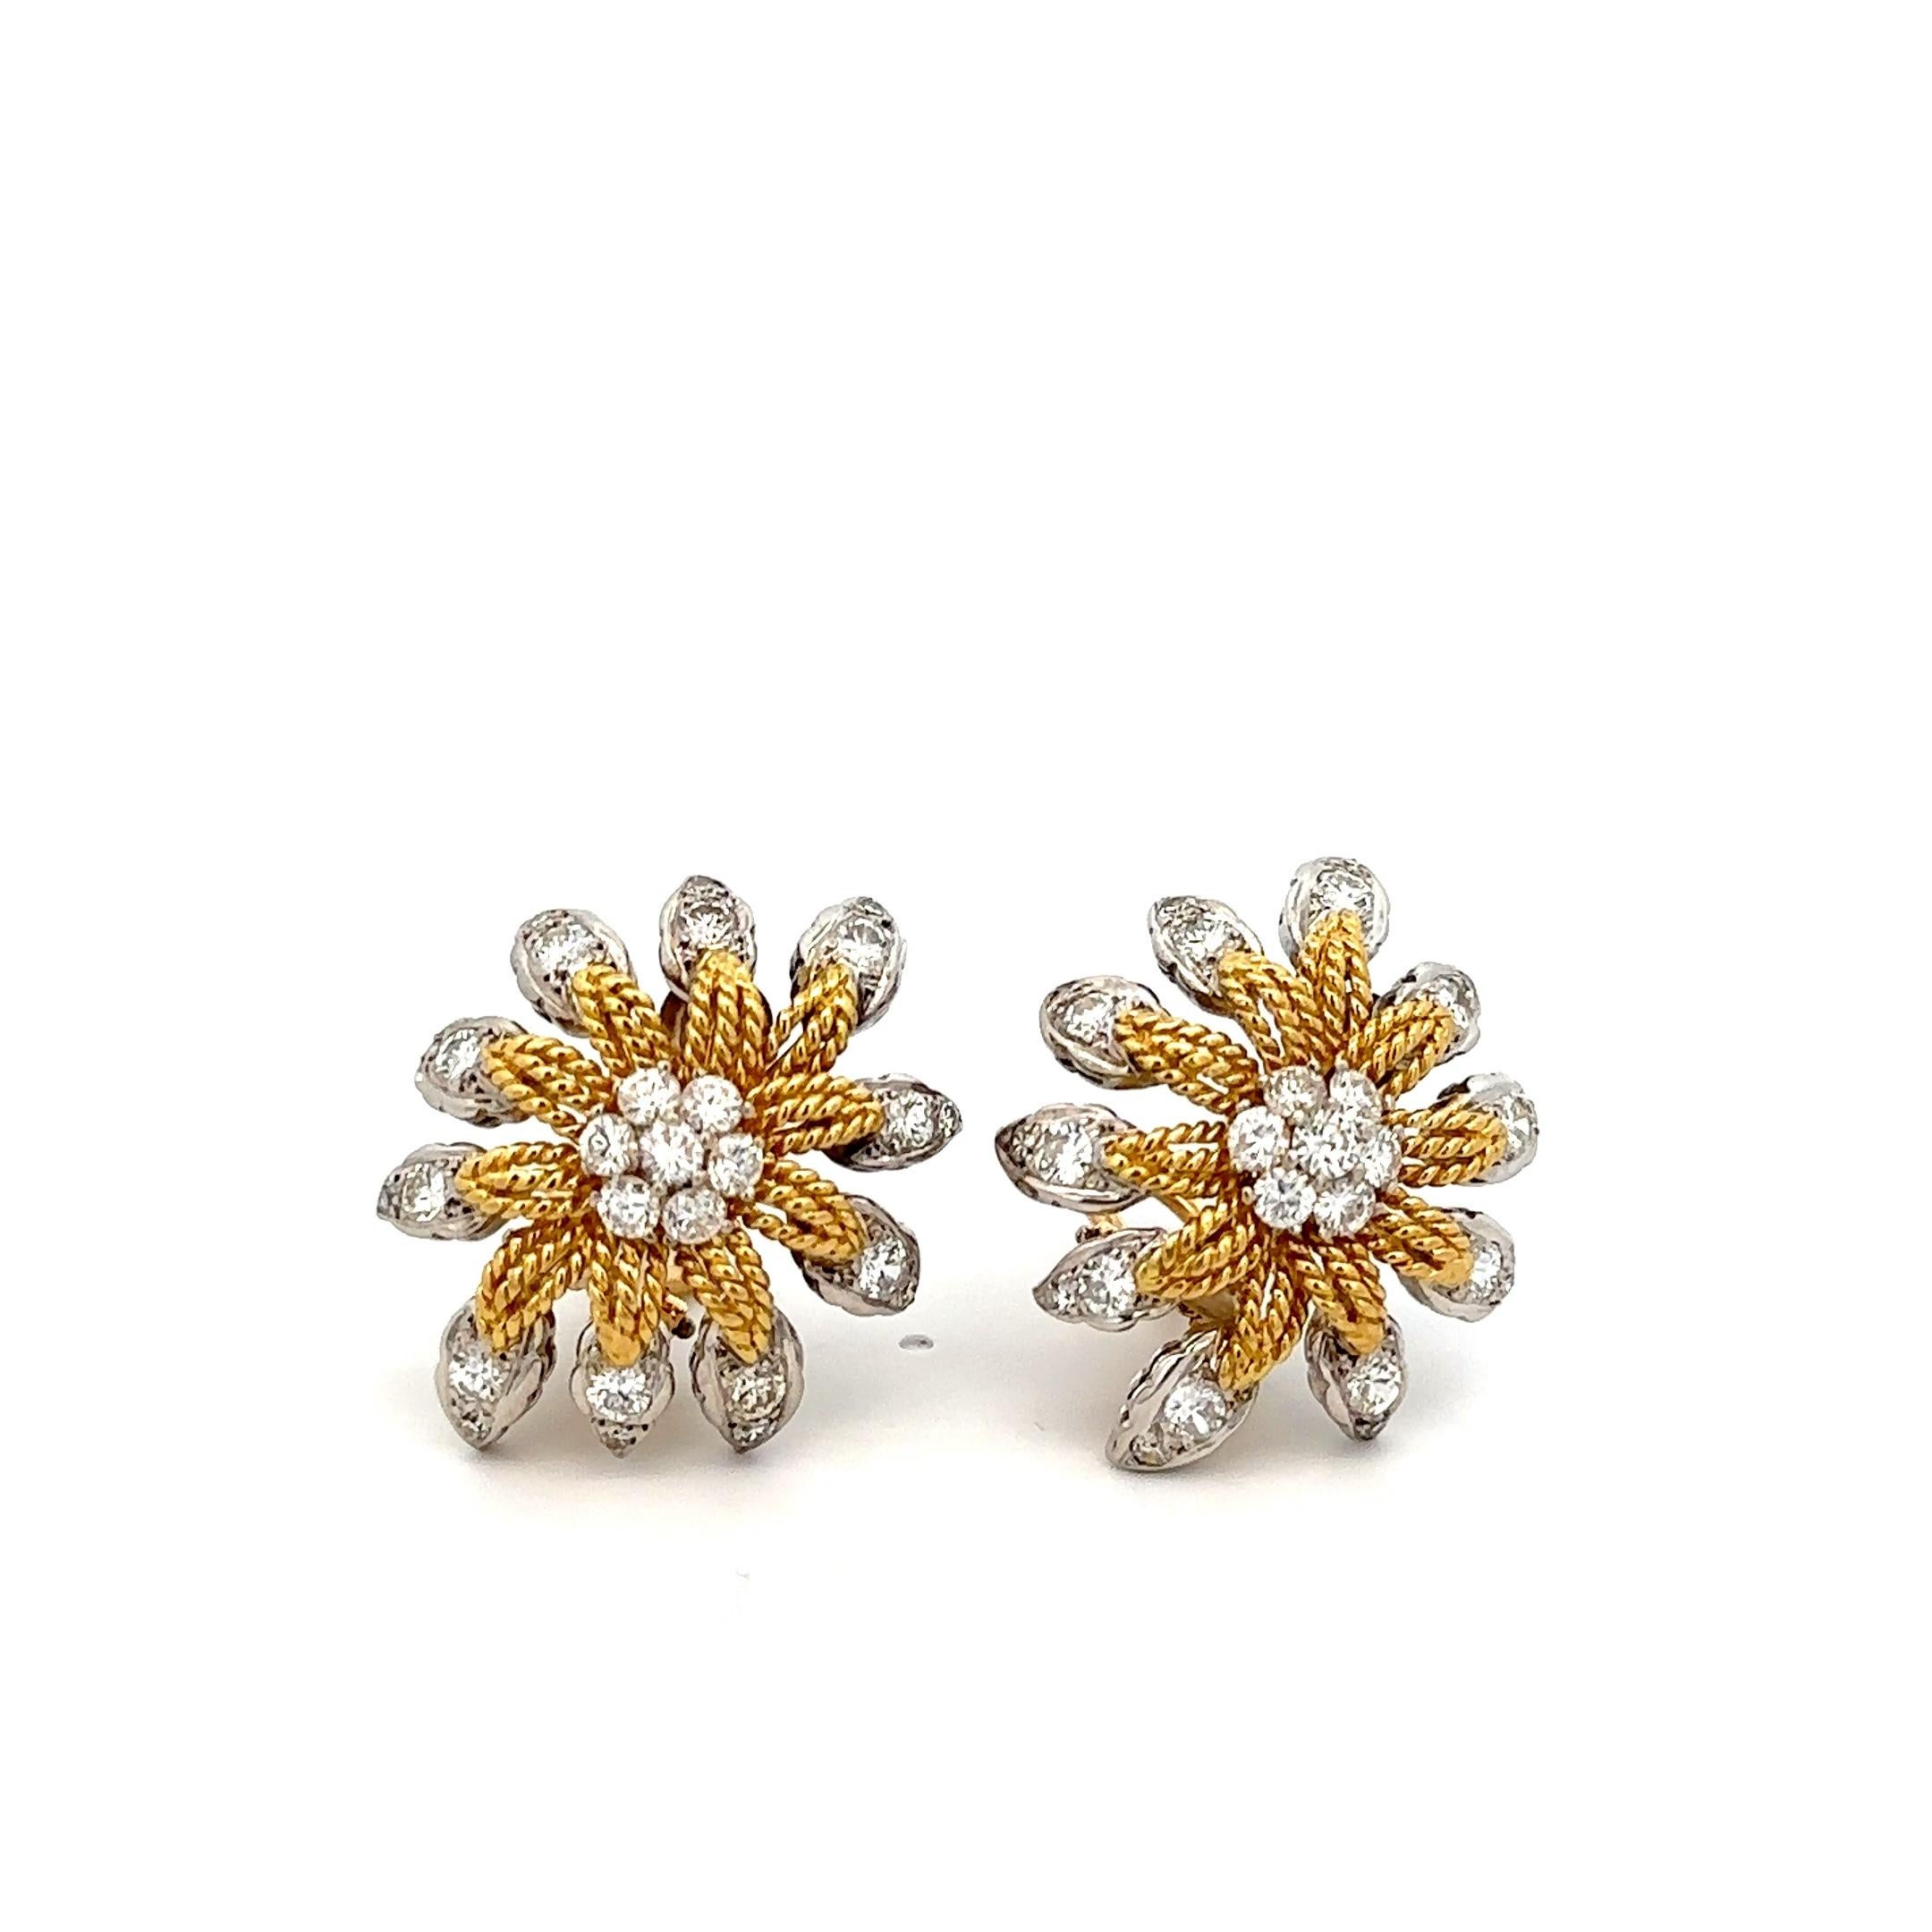 2.95cts Diamond and 18K Two Tone Gold Clip on Flower Design Earrings  In Excellent Condition For Sale In Aventura, FL